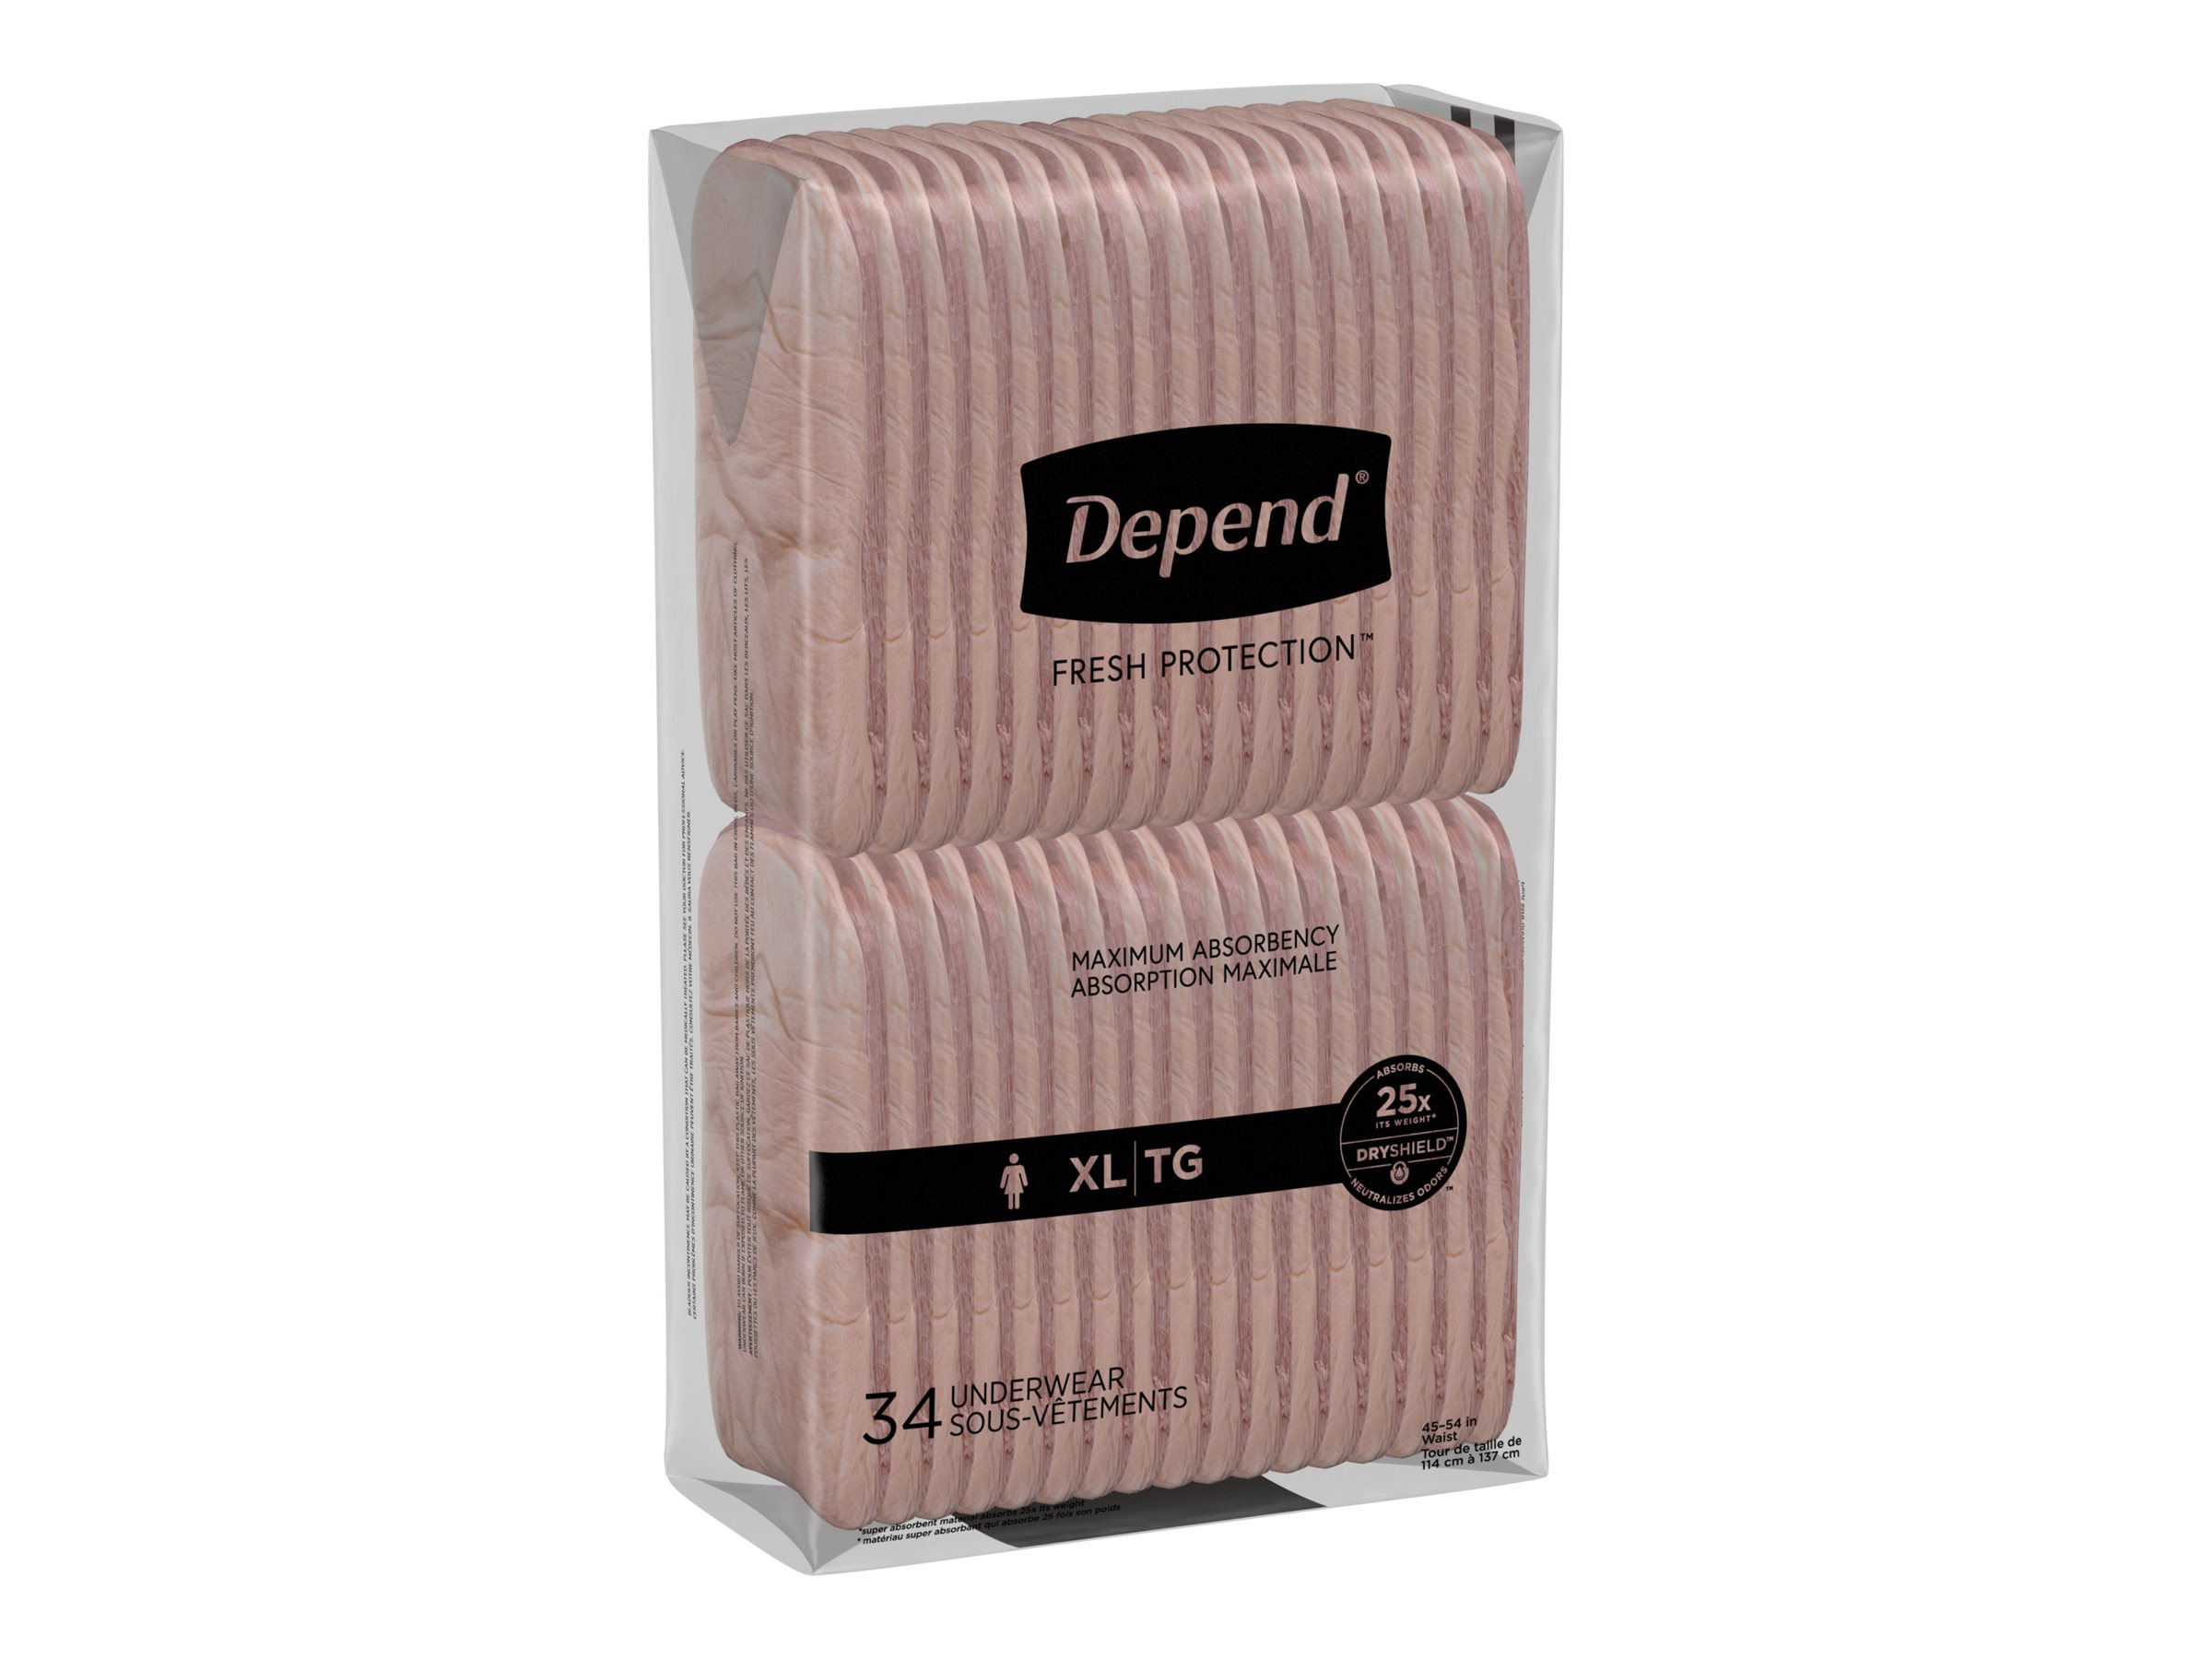 Depend Fresh Protection Adult Incontinence Underwear for Women, Maximum, M,  Blush, 30Ct 